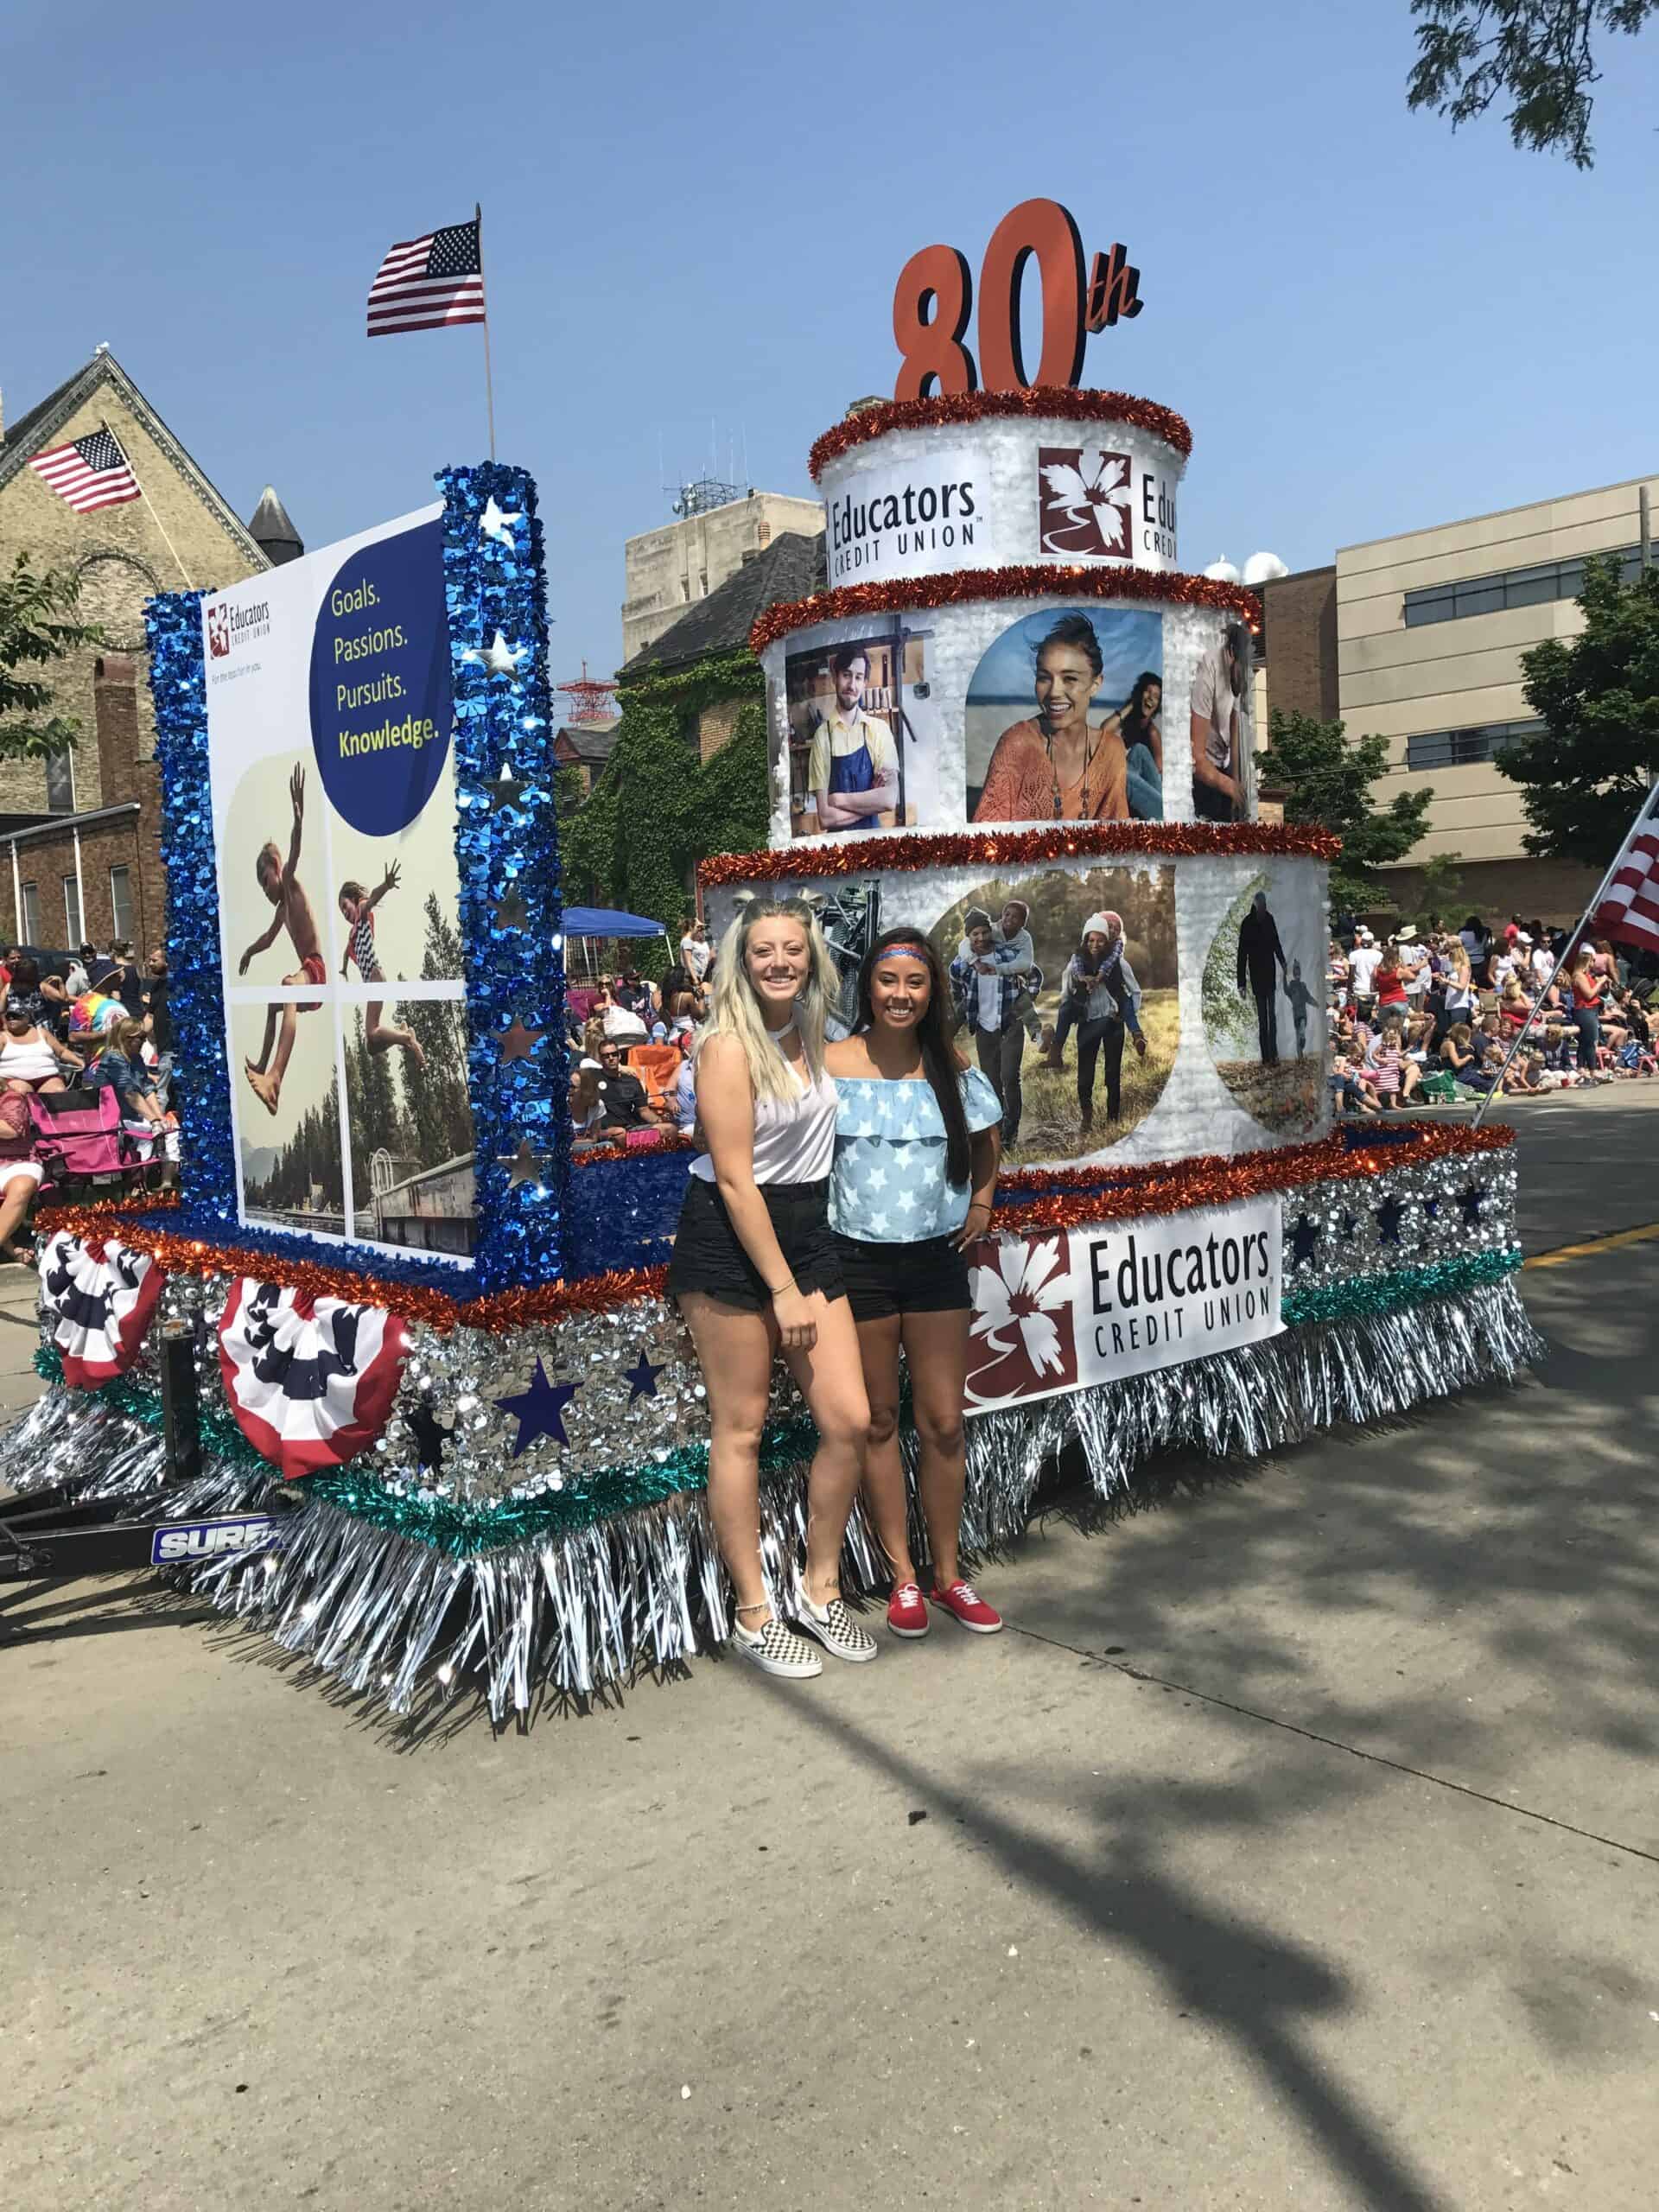 Photo of the Educator's float during the 4th of July parade in Racine